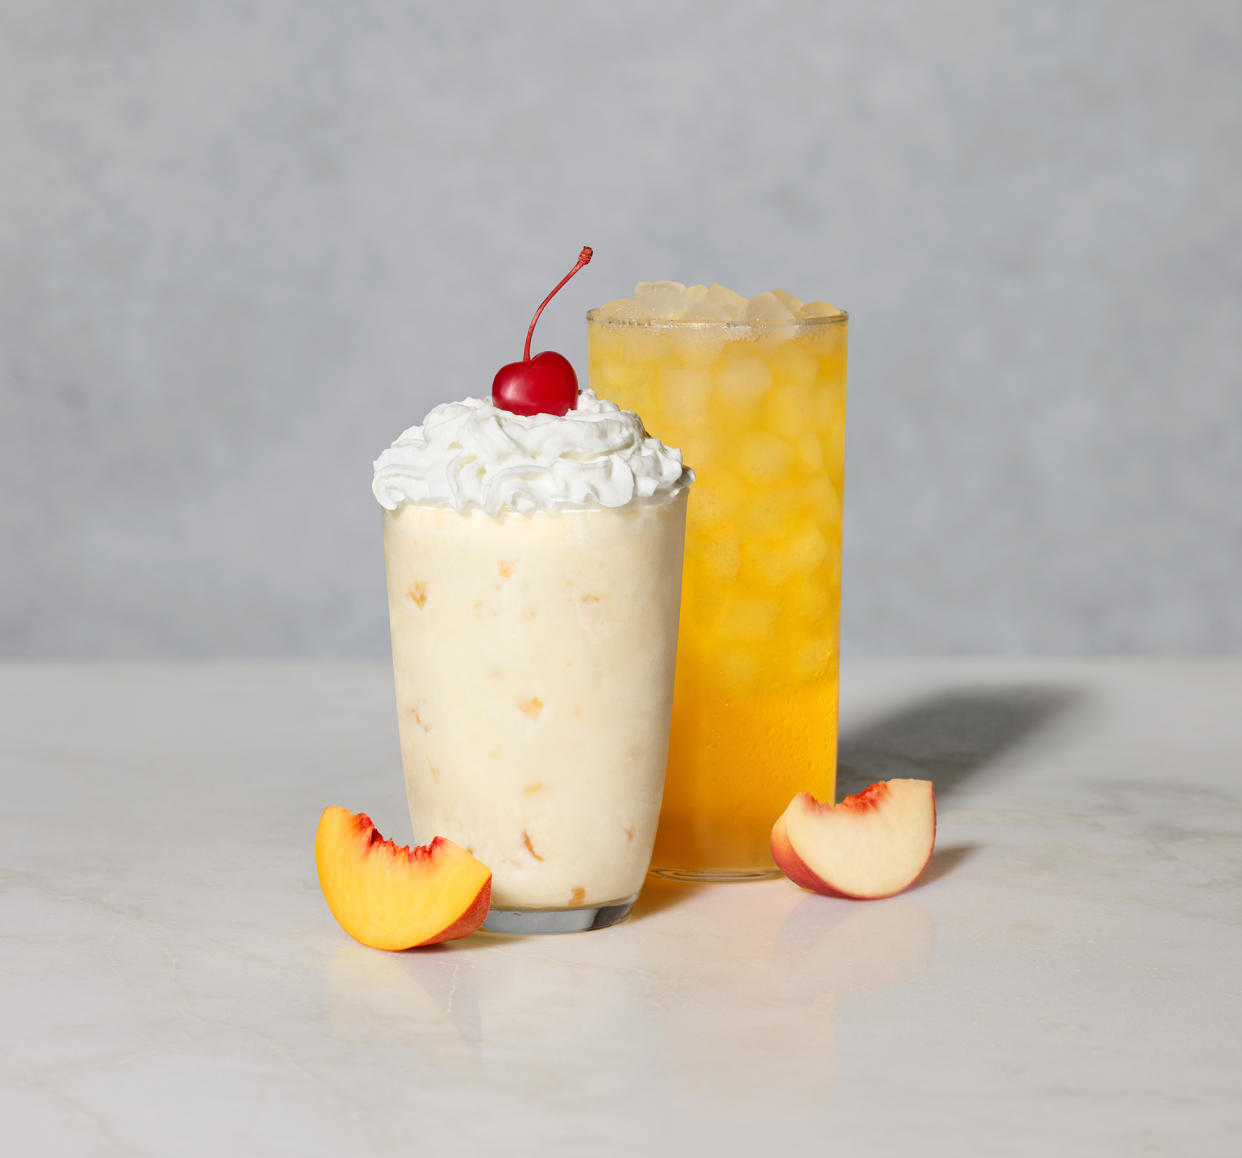 Chick-fil-A brings back 2 peach-flavored fan-favorite menu items for summer (Courtesy Chick-fil-A)